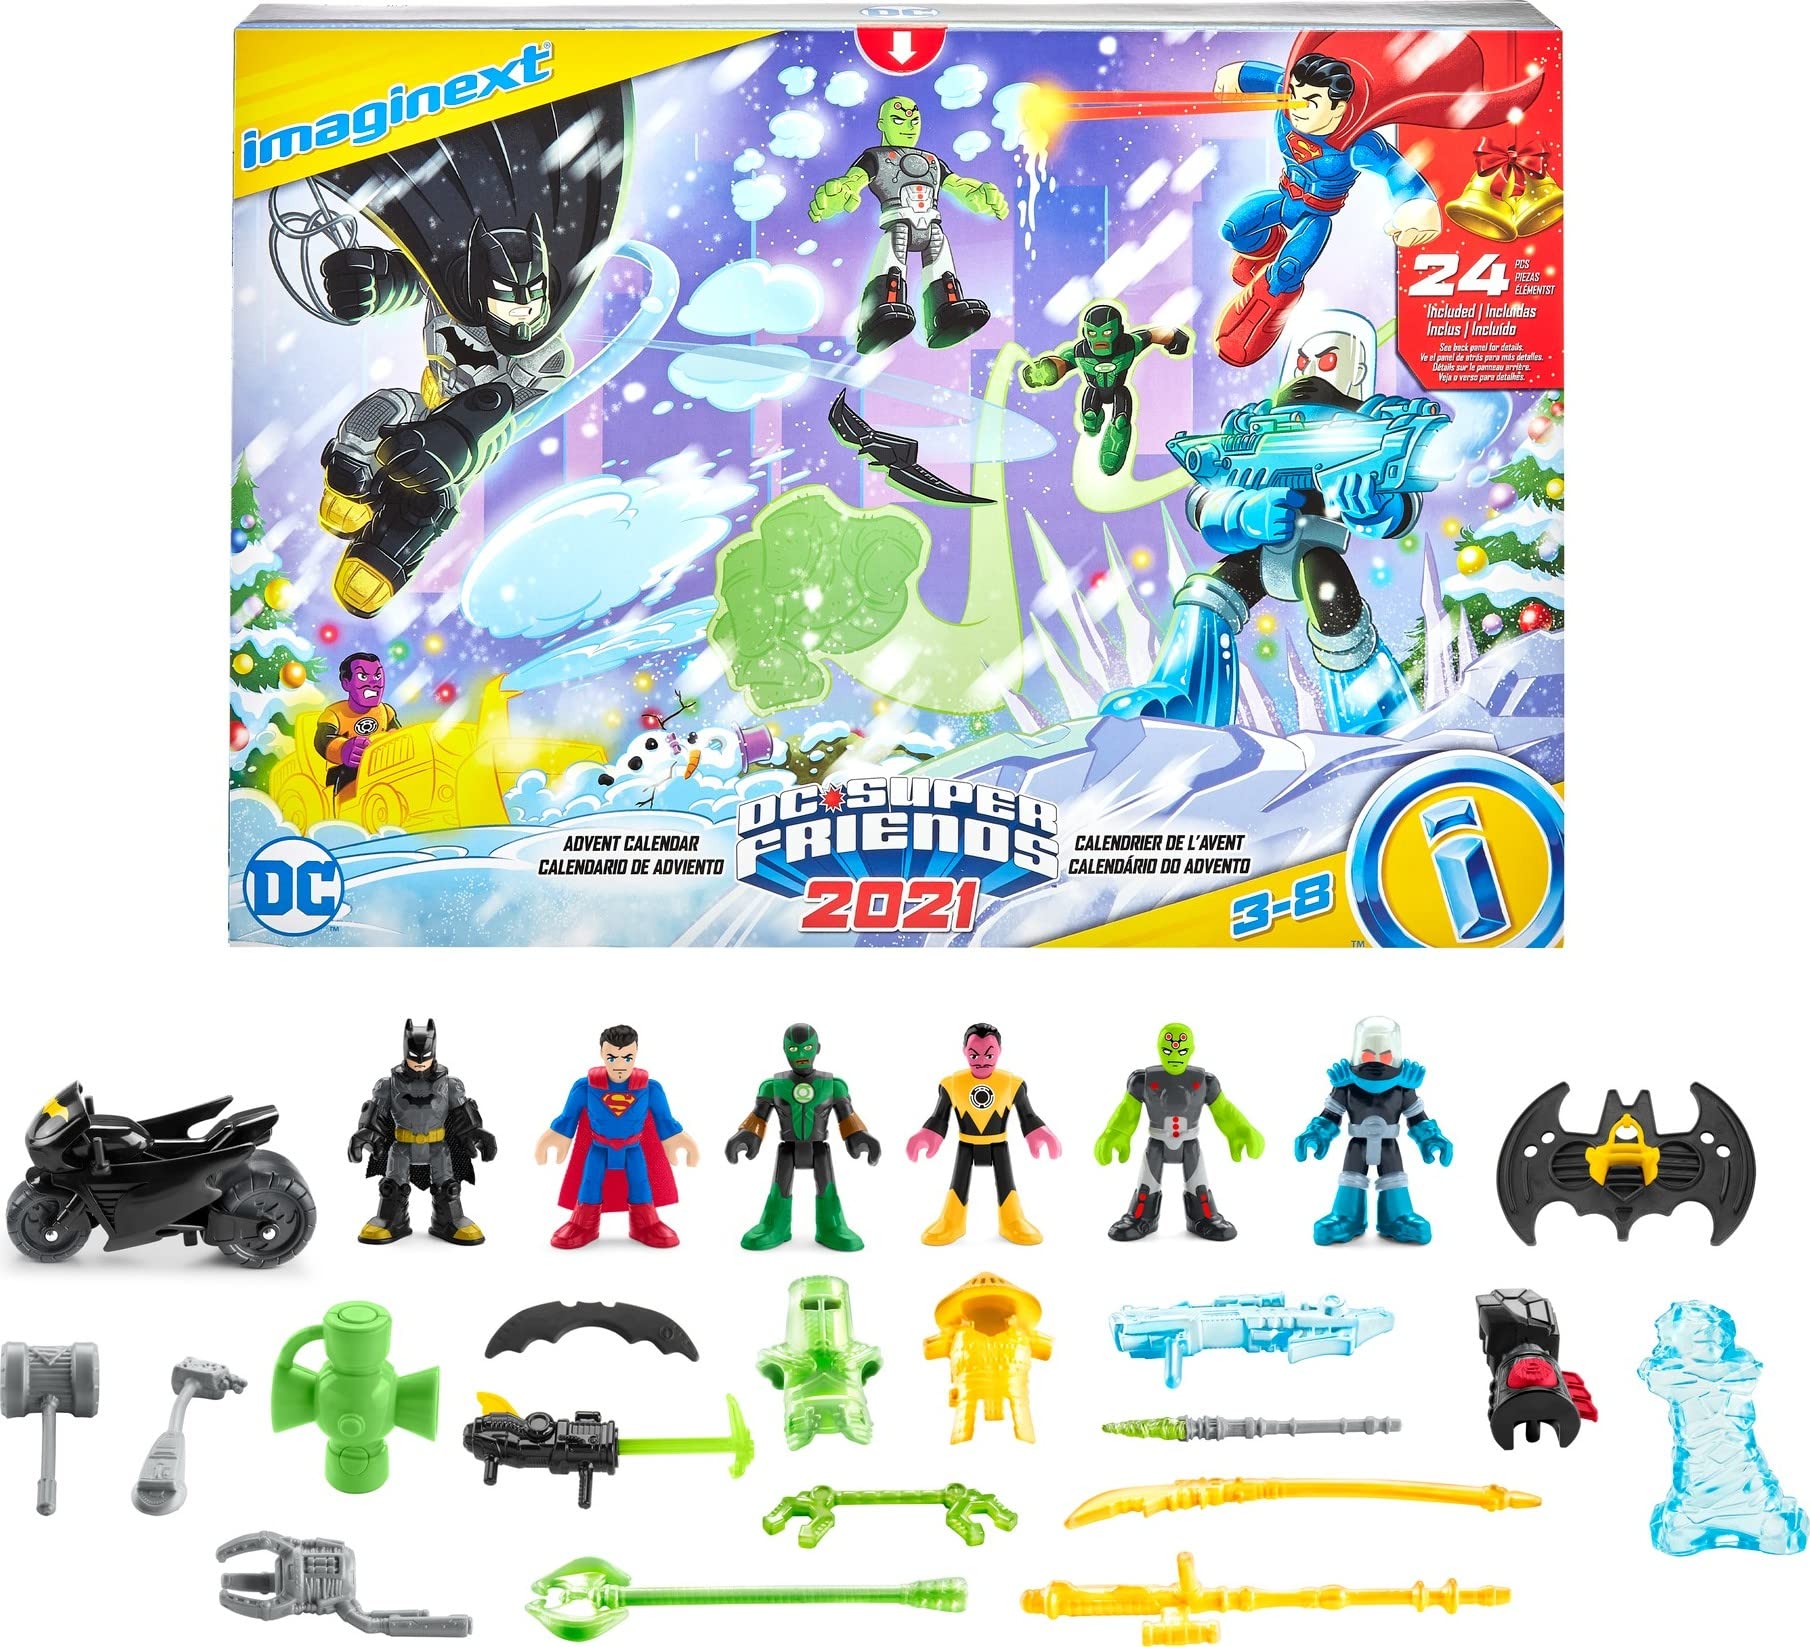 DC Super Friends Imaginext DC Super Friends Advent Calendar 24 mystery toys including figures accessories and a vehicle for